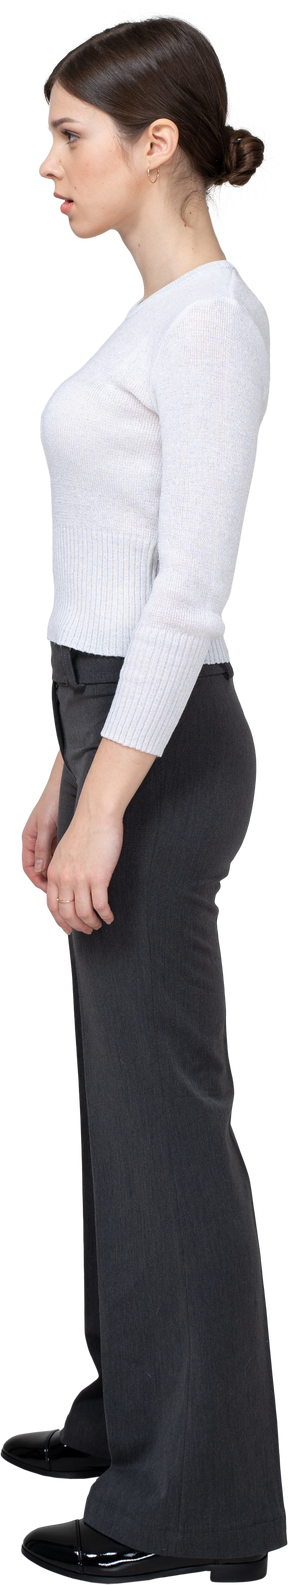 Side view of a young woman in office clothing standing still